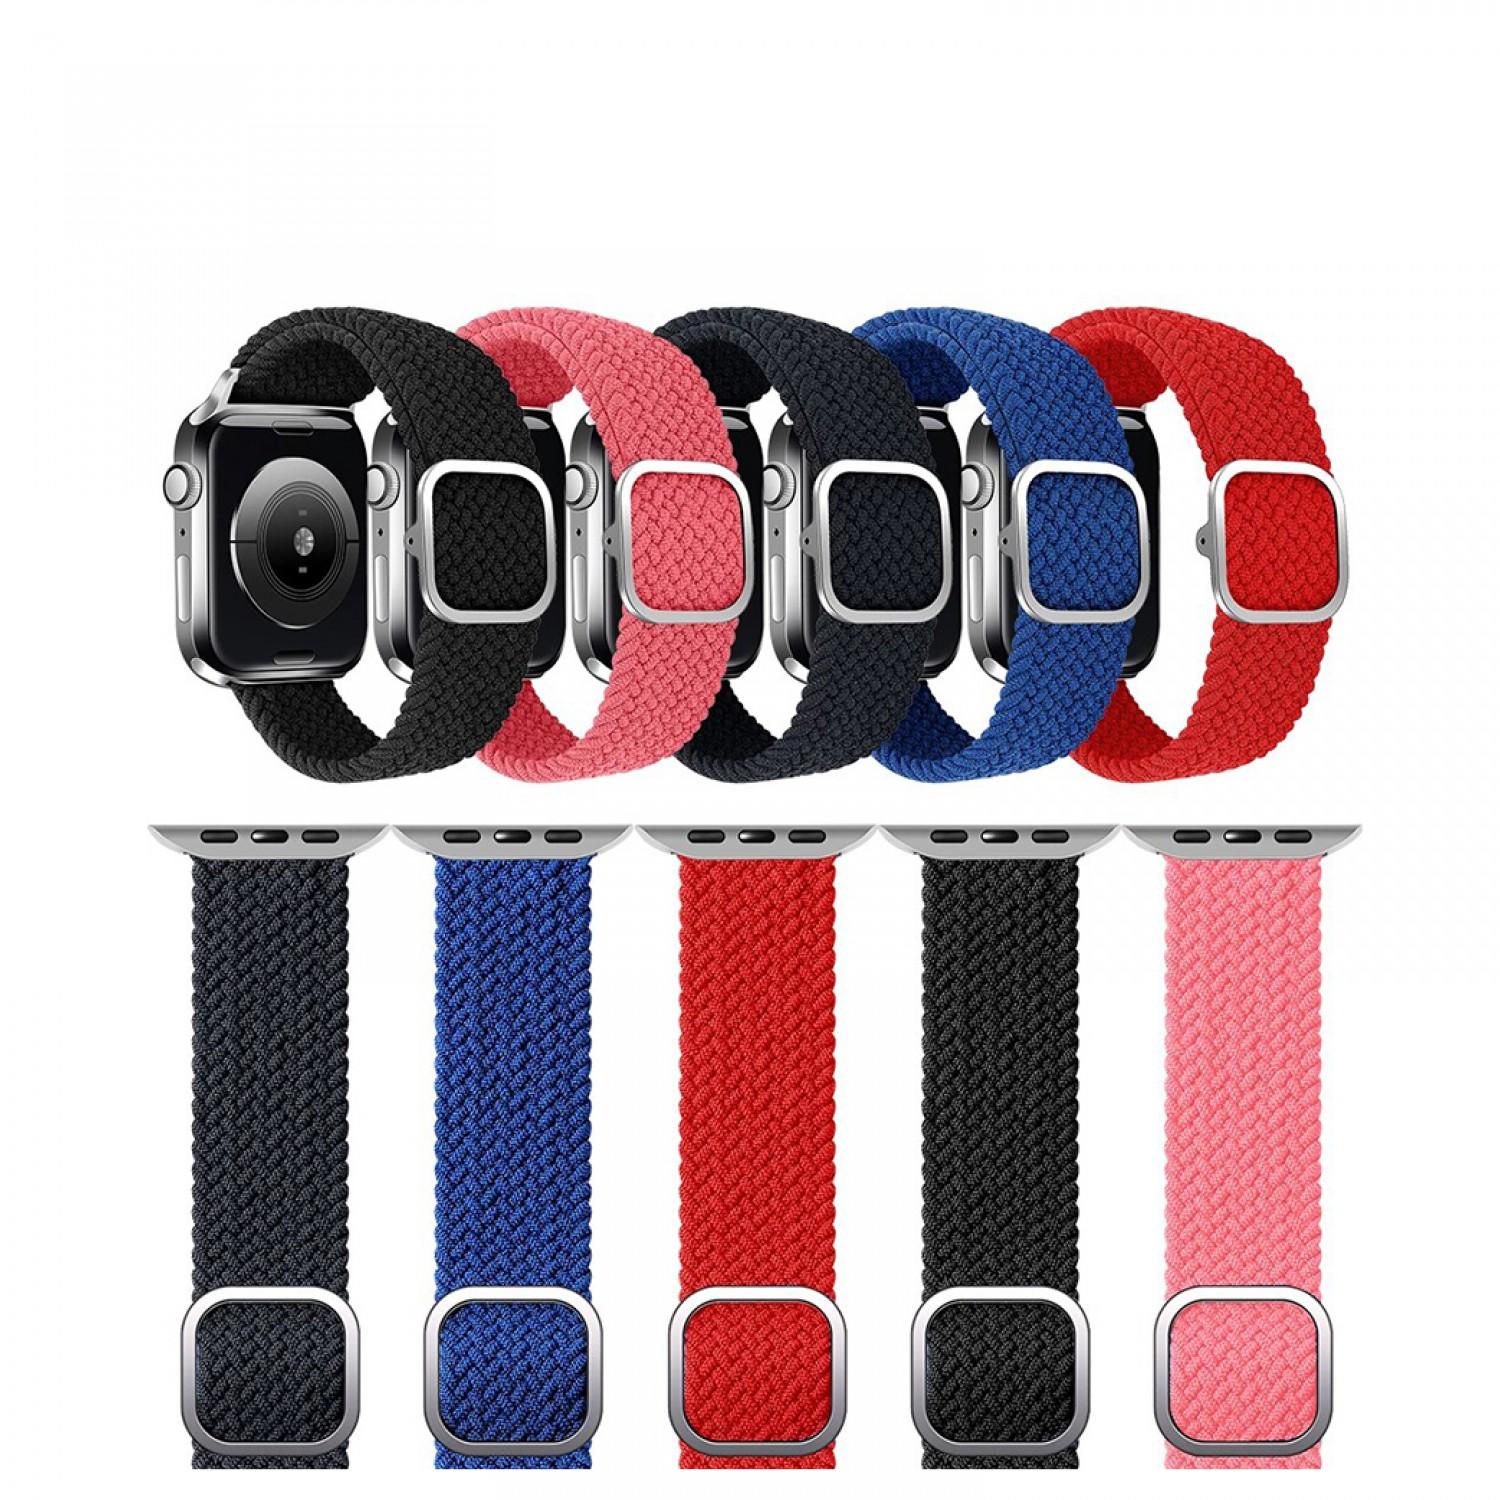 Coteetci Nylon Adjustable Length Strap for Apple Watch 42/44mm